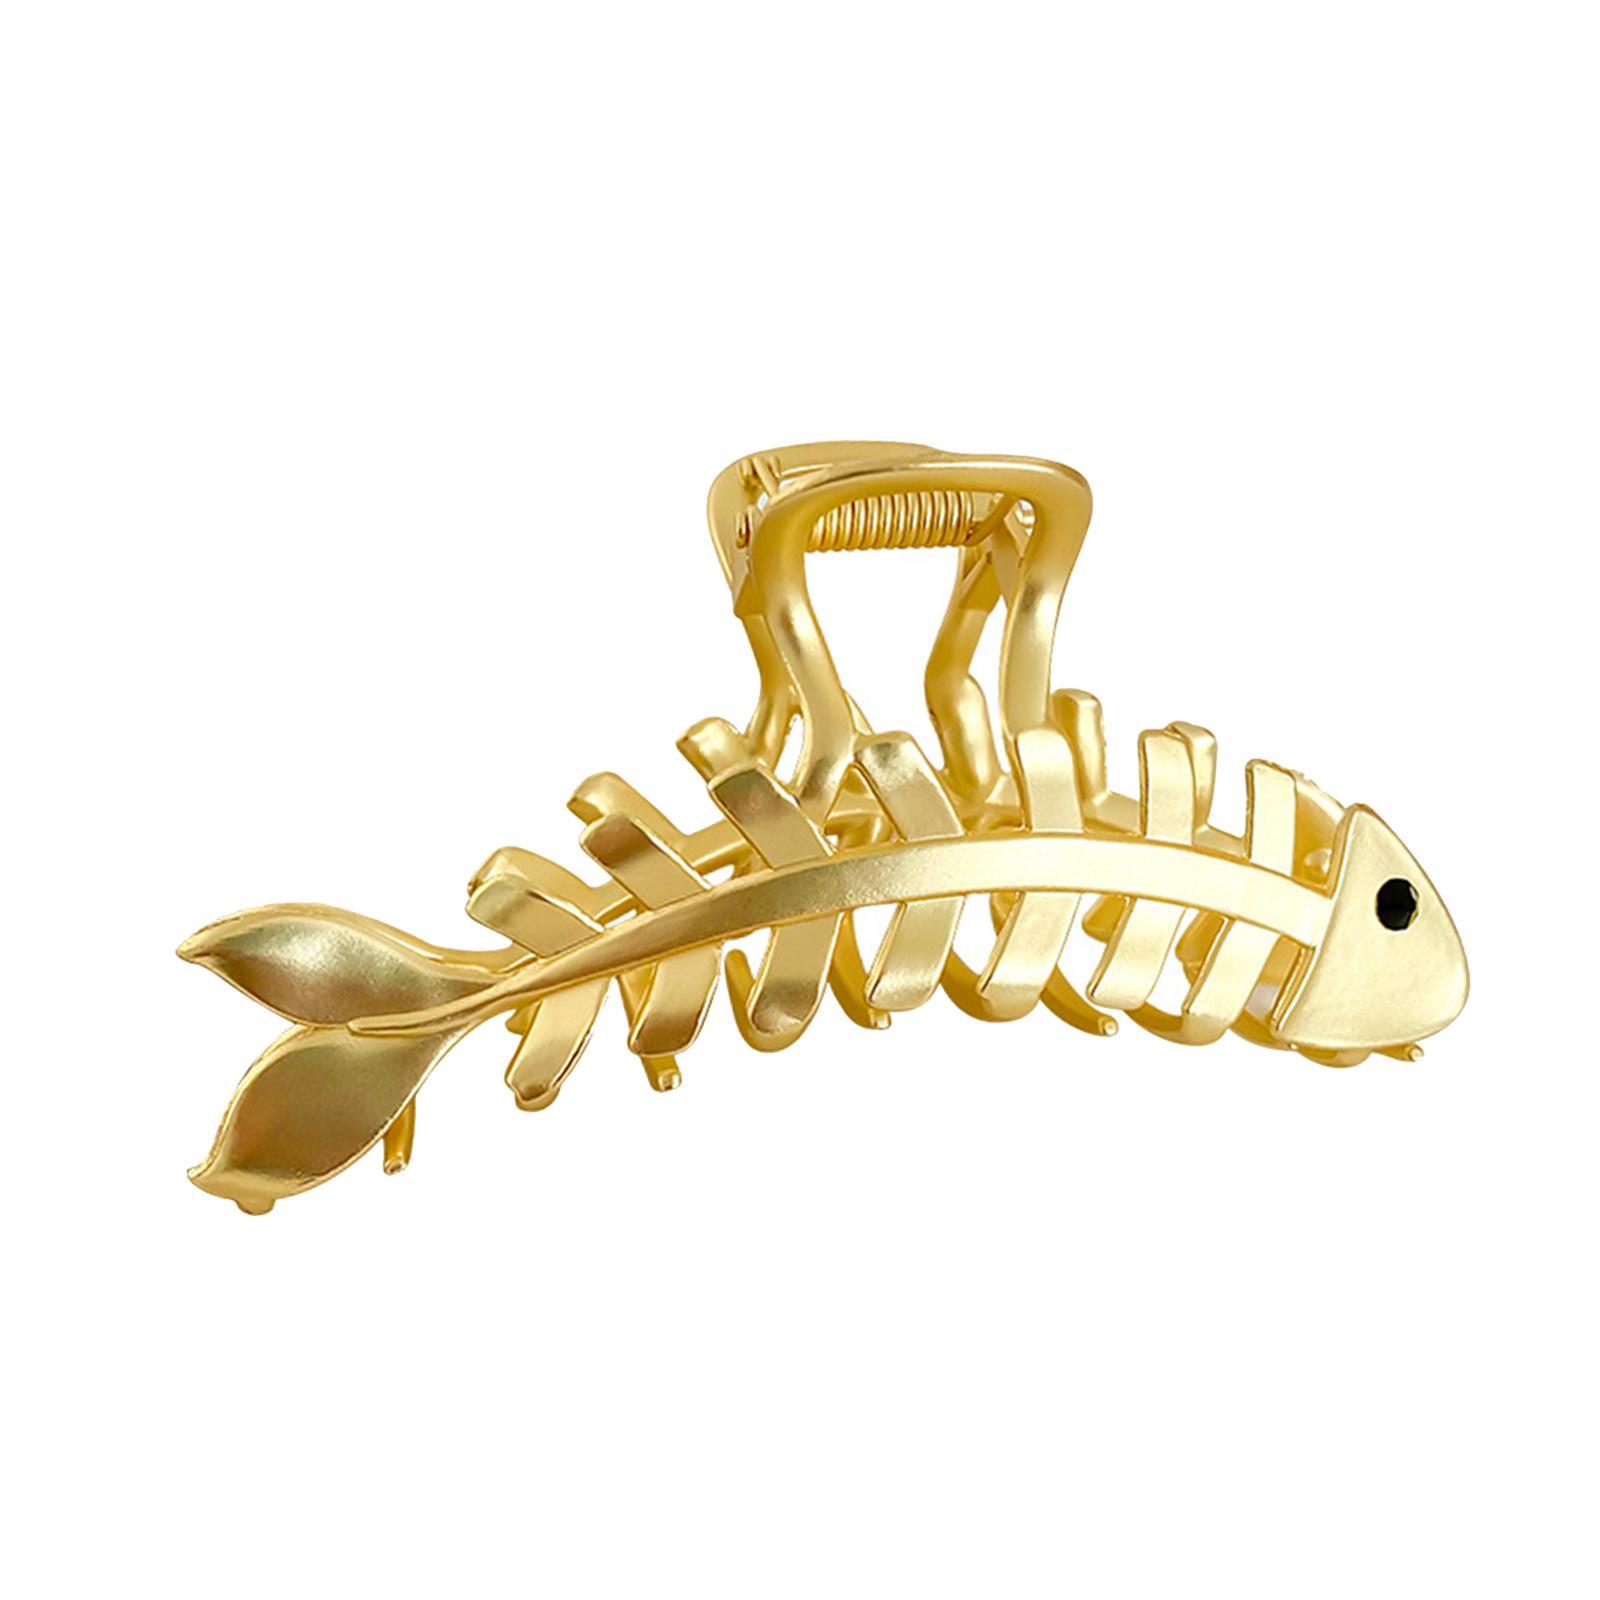 Hair  Fishbone Shape Design for Thick Hair Hair Styling Accessories